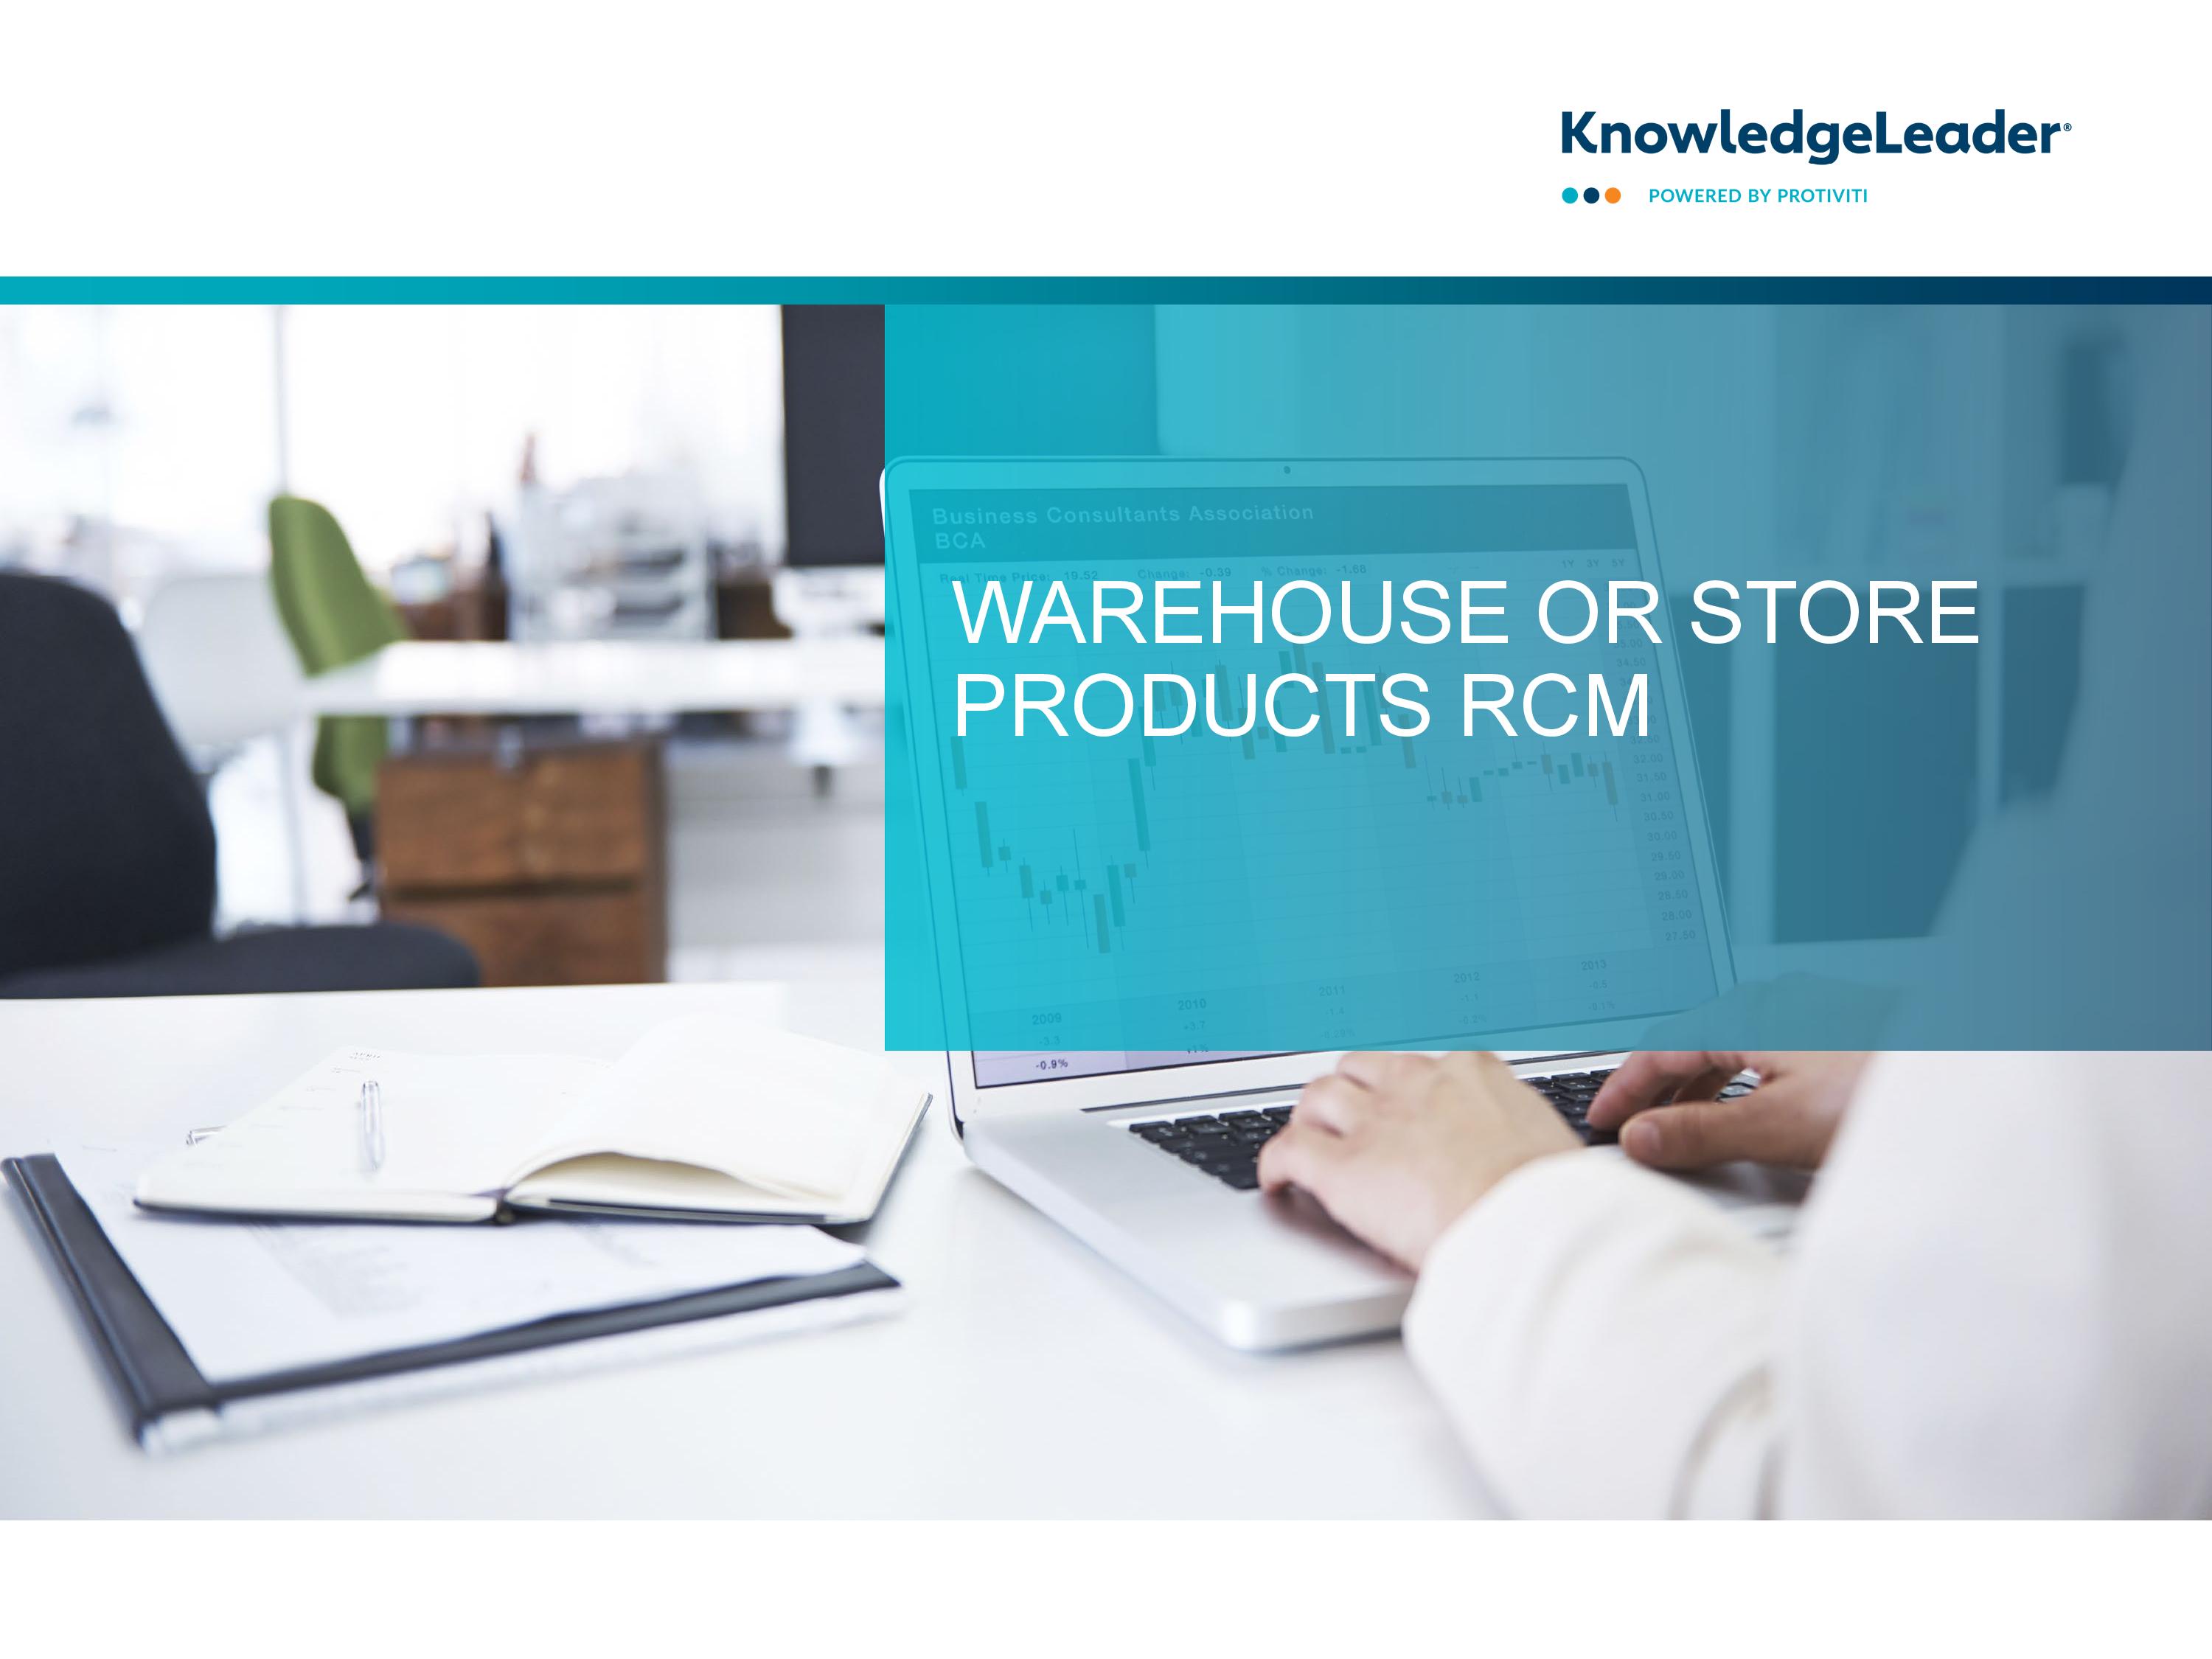 Warehouse or Store Products RCM